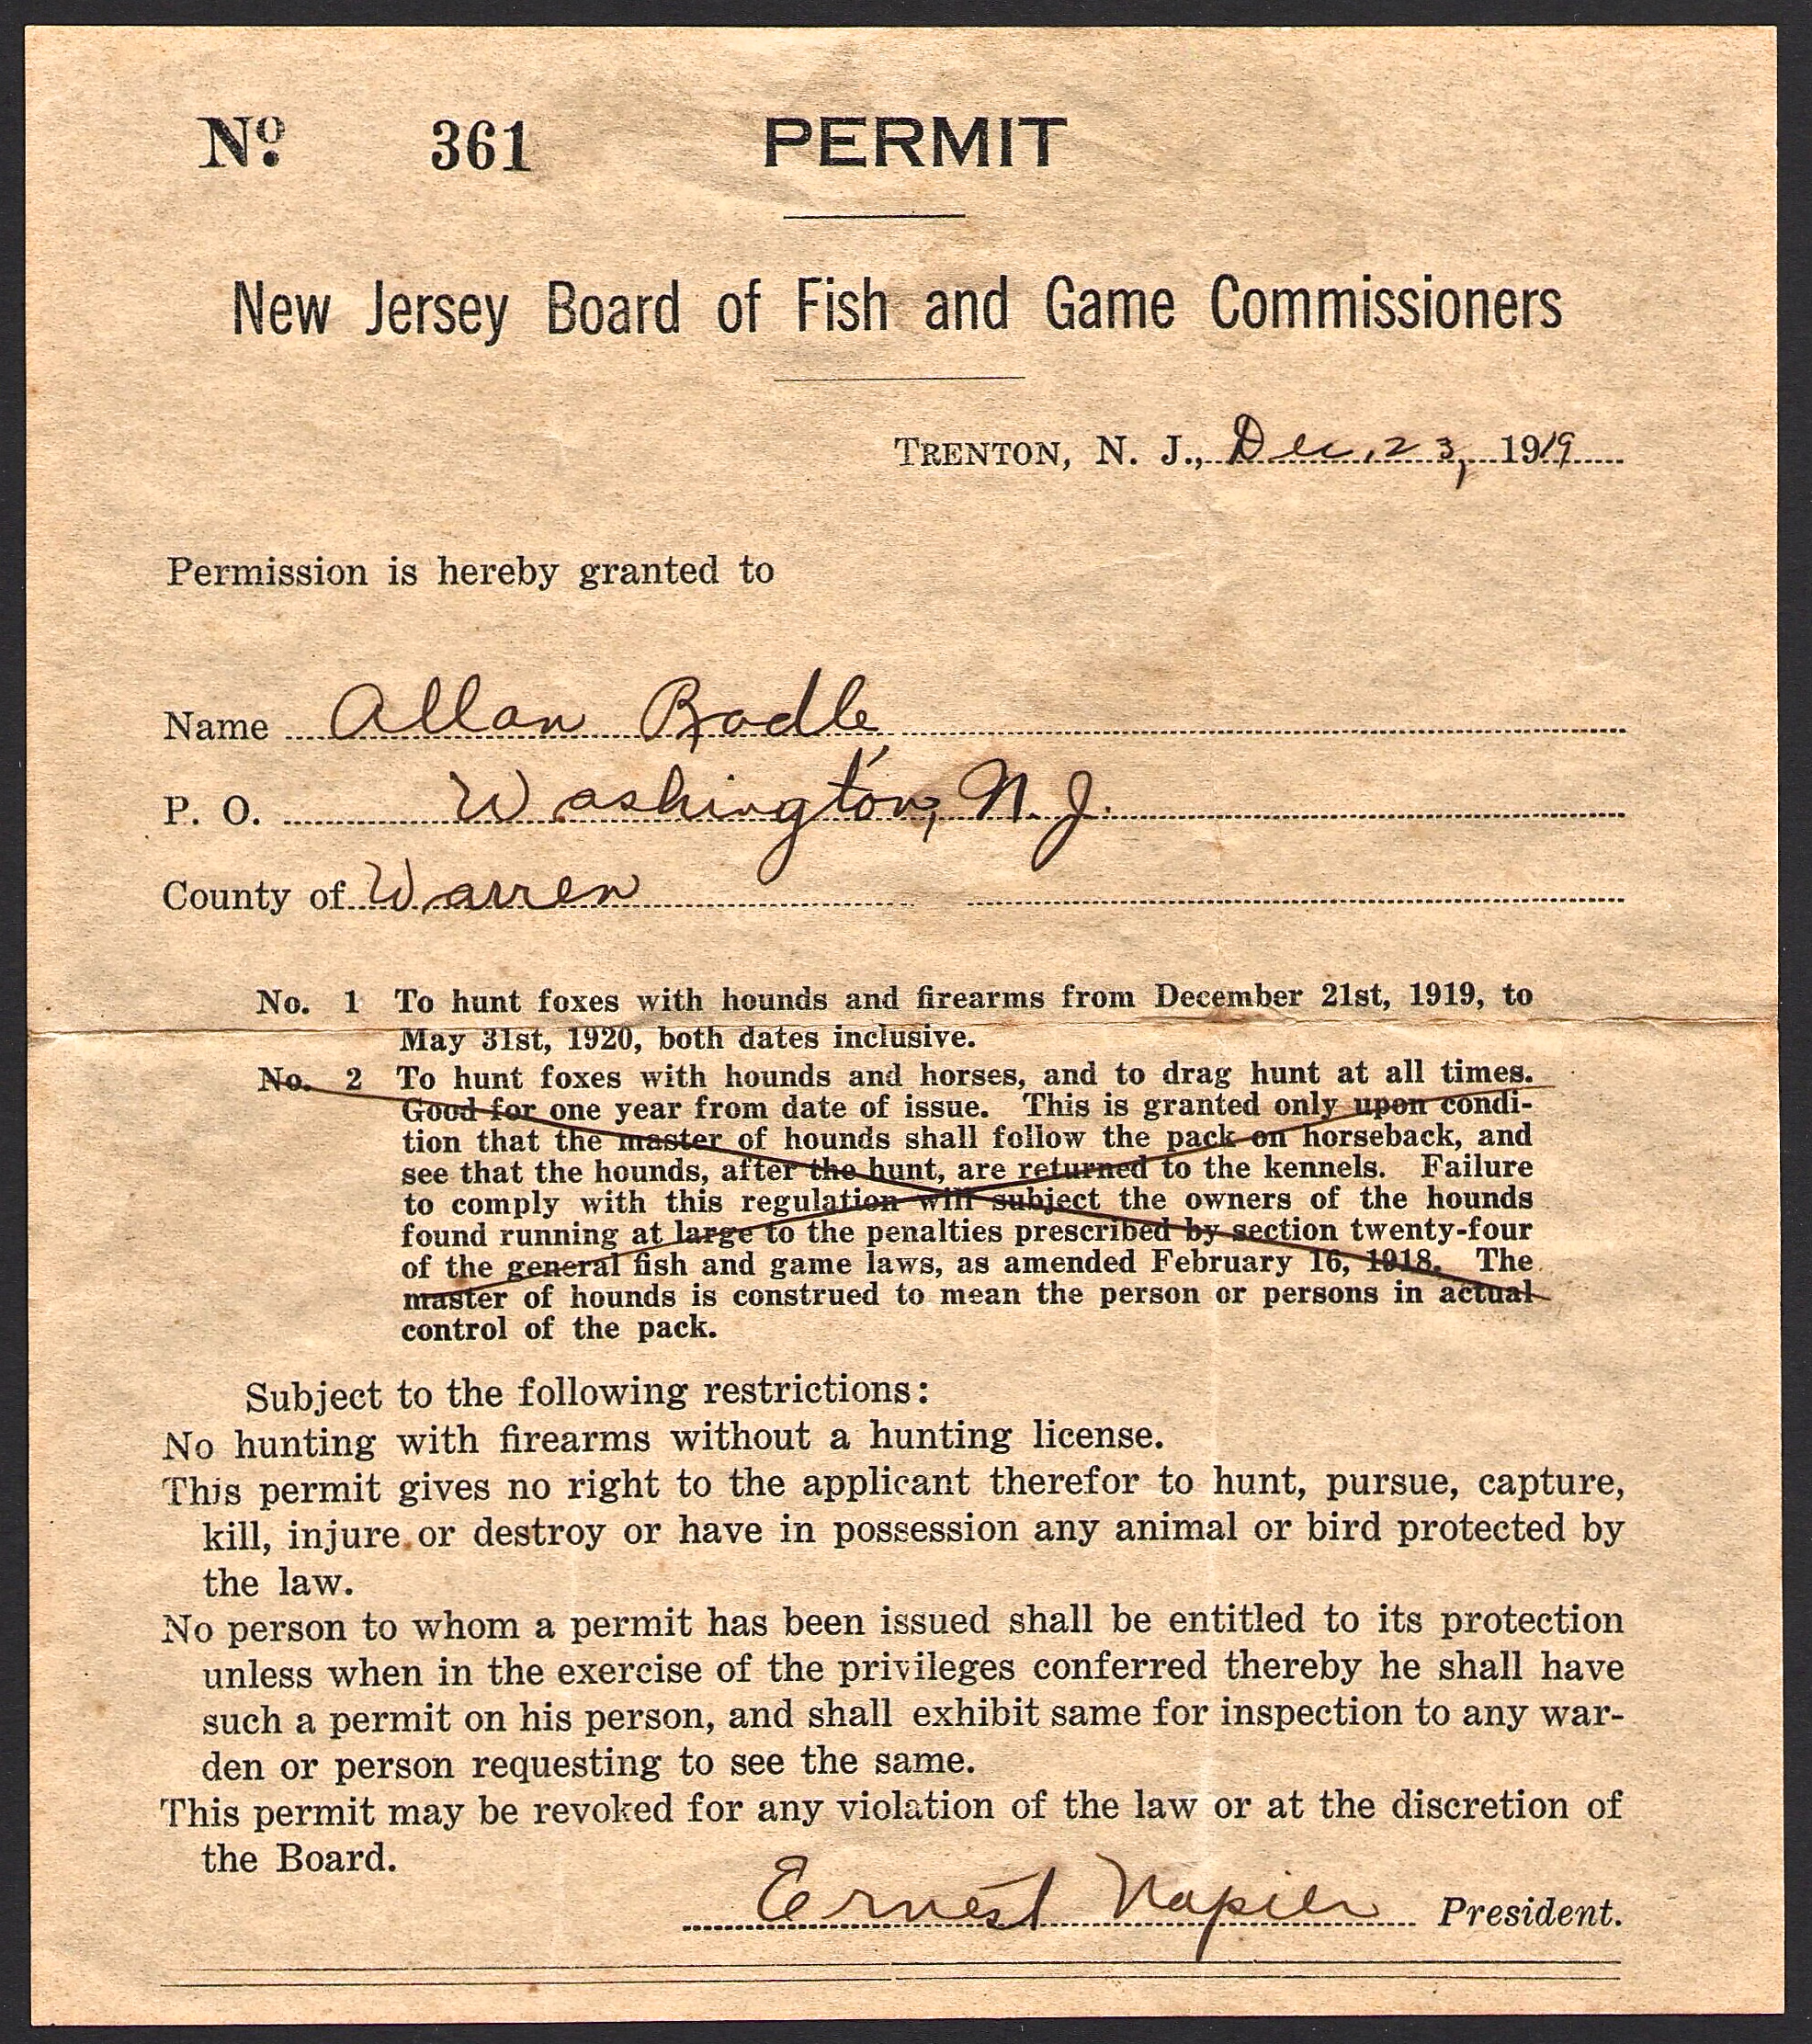 1919 New Jersey Permit to Hunt Foxes with Hounds